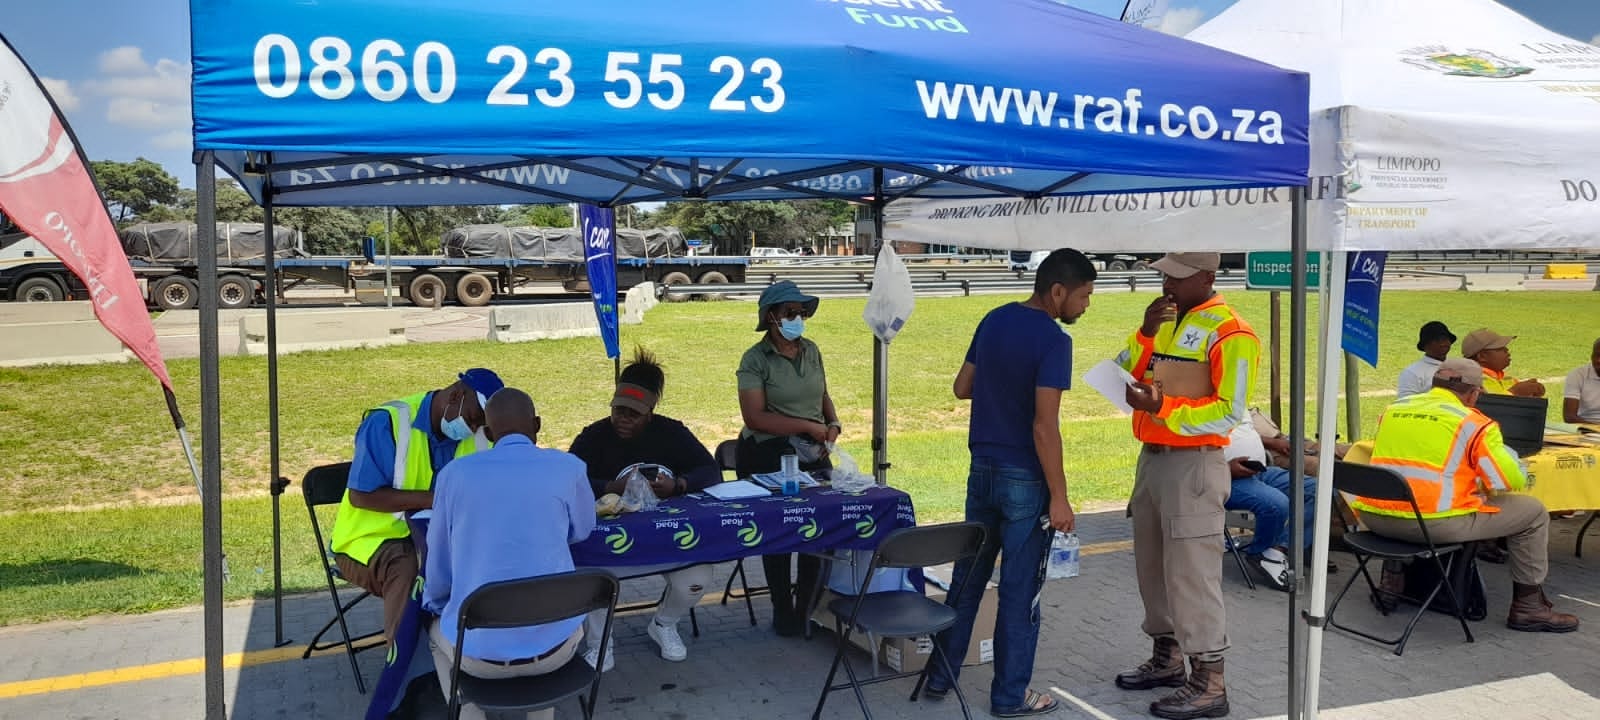 RAF wraps up succesful driver wellness programme in the Waterberg District